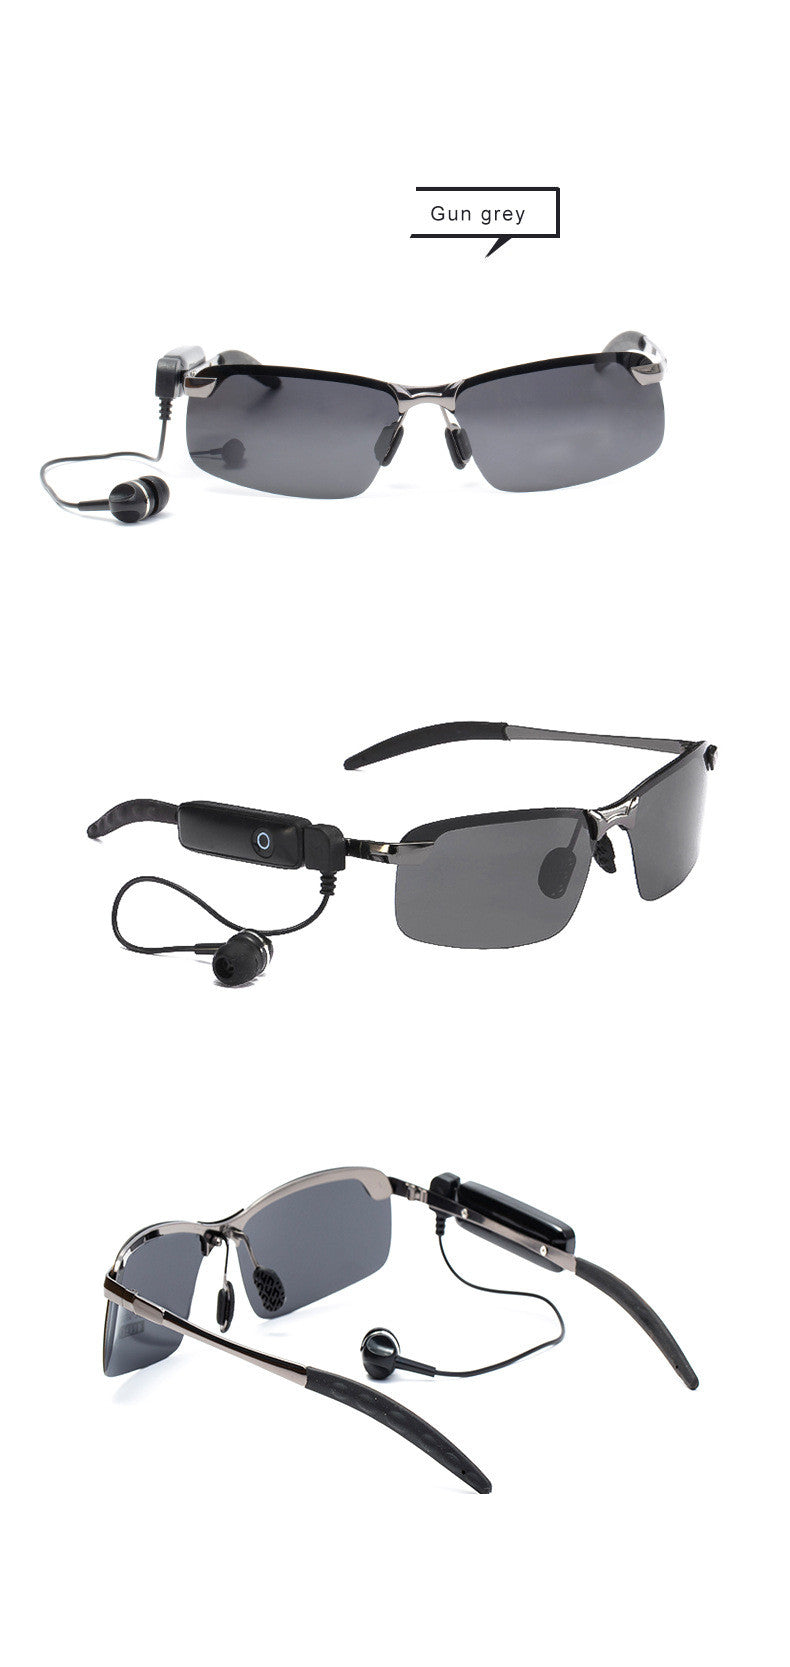 Stereo bluetooth glasses